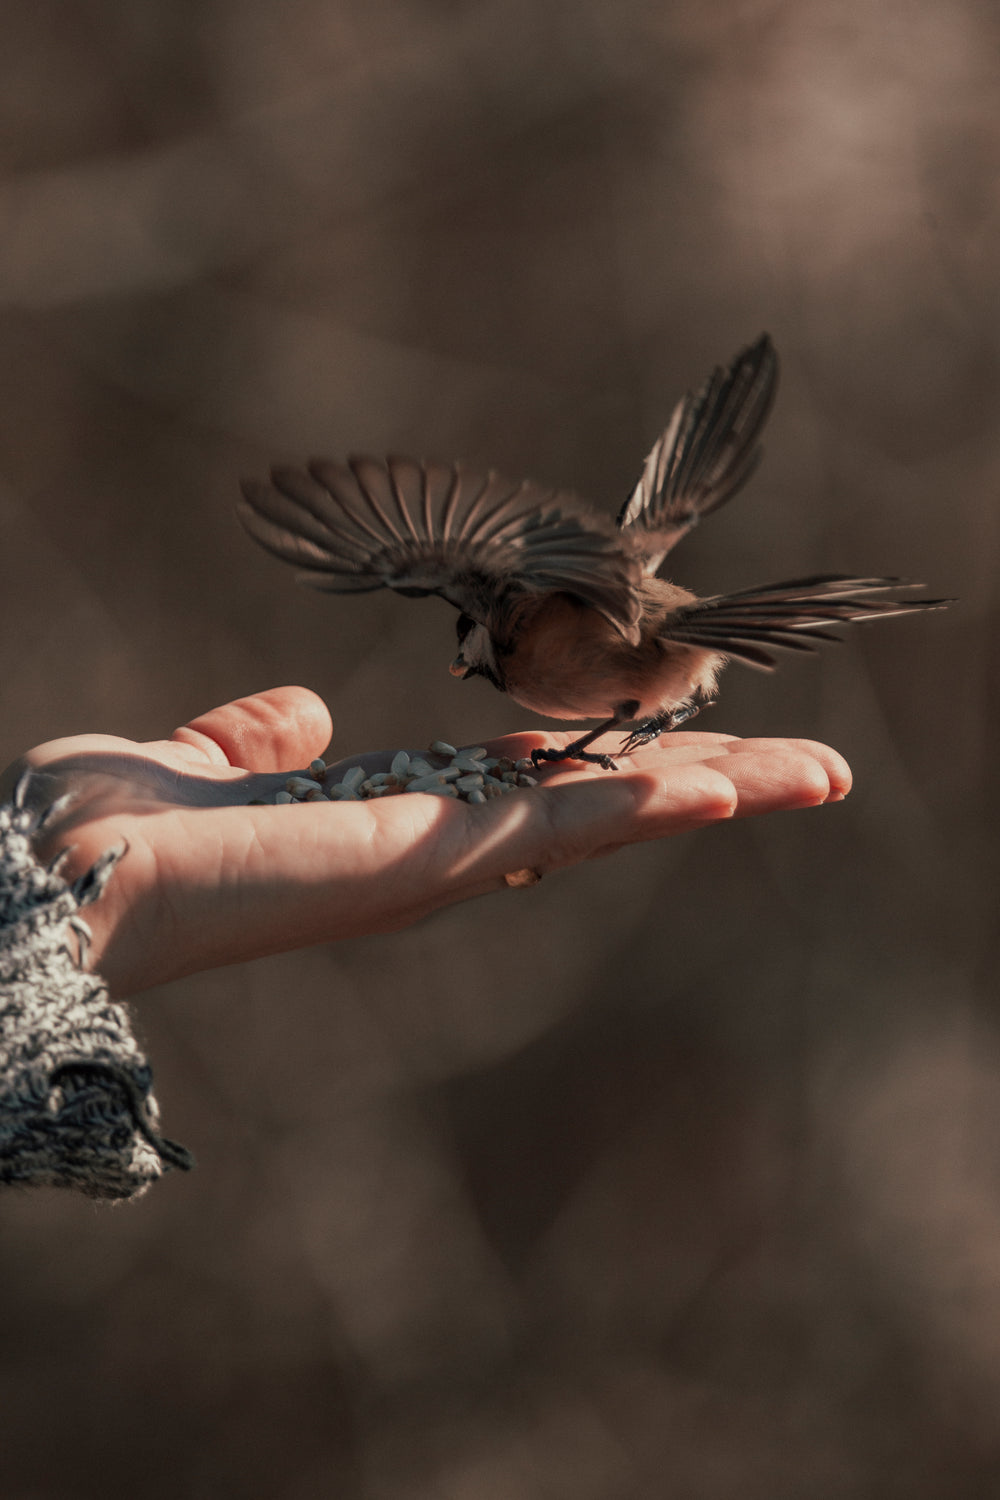 bird spreads its wings as it lands on the palm of a persons hand